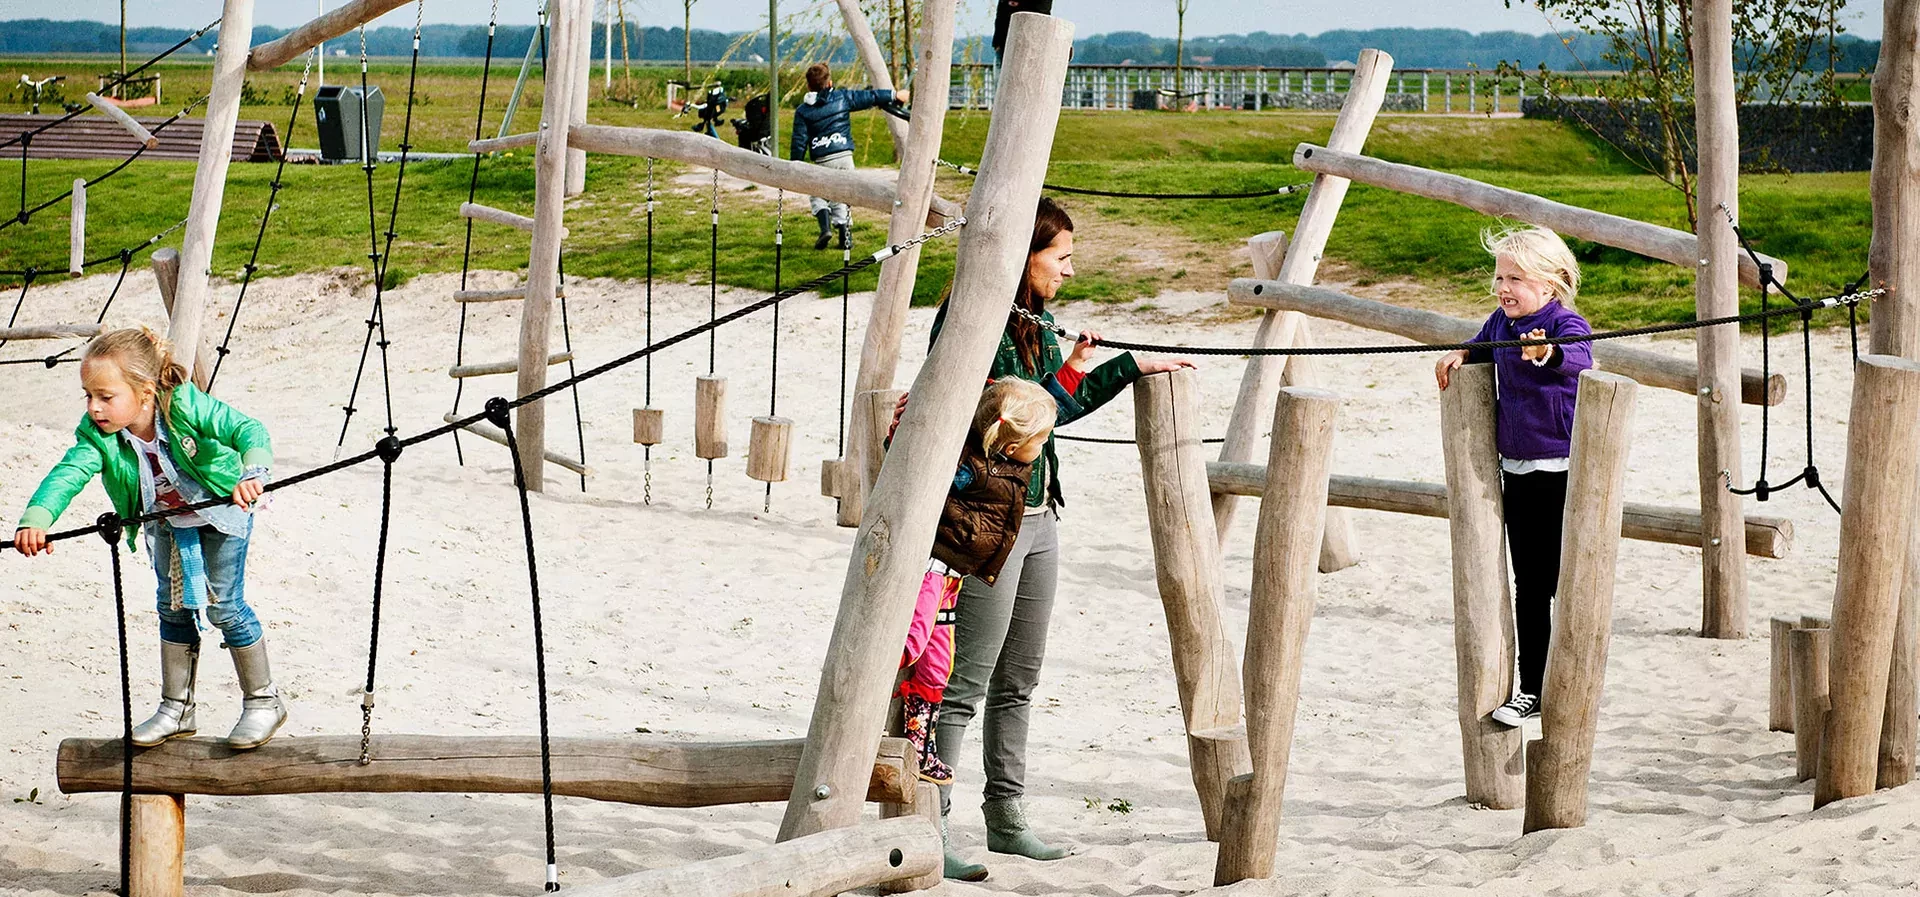 Children playing on a wooden climbing trail obstacle course